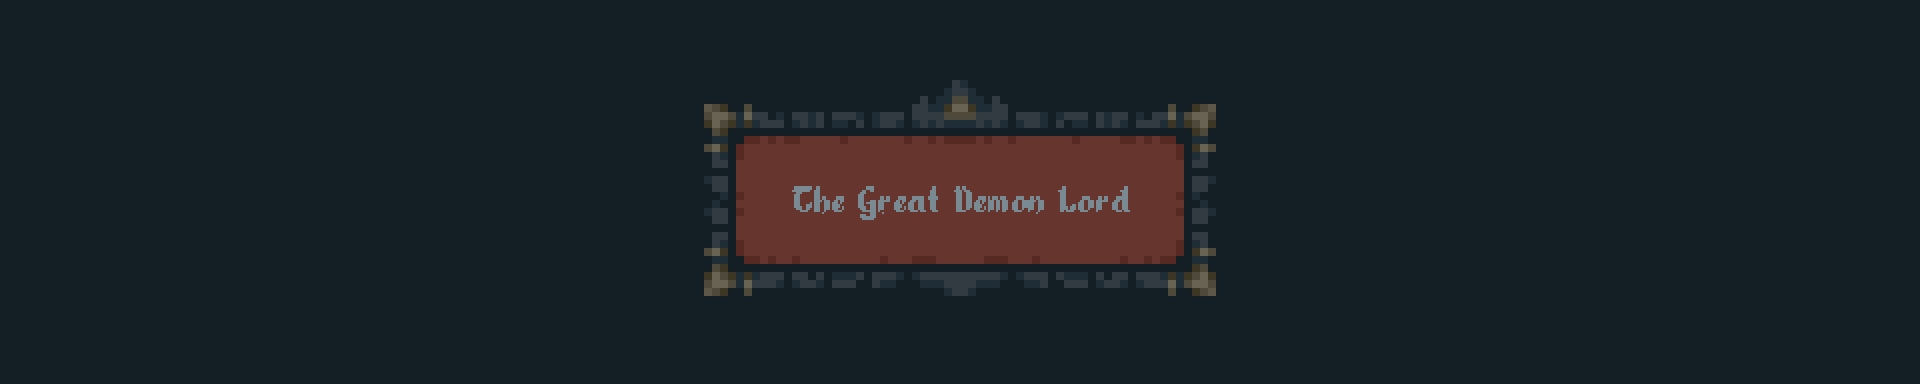 The Great Demon Lord